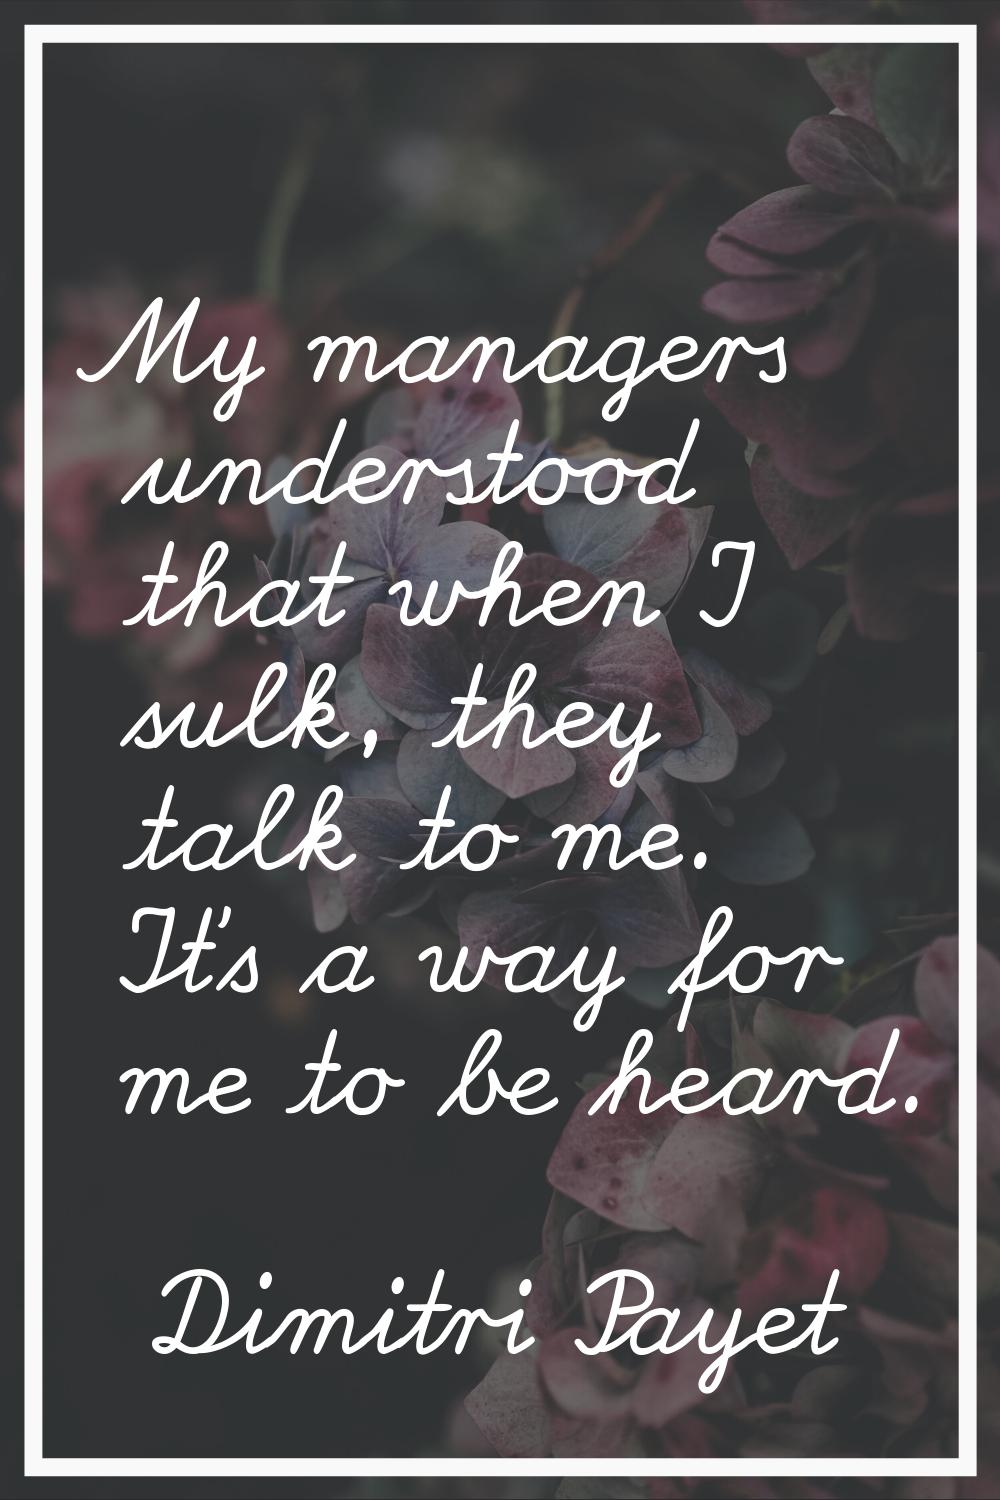 My managers understood that when I sulk, they talk to me. It's a way for me to be heard.